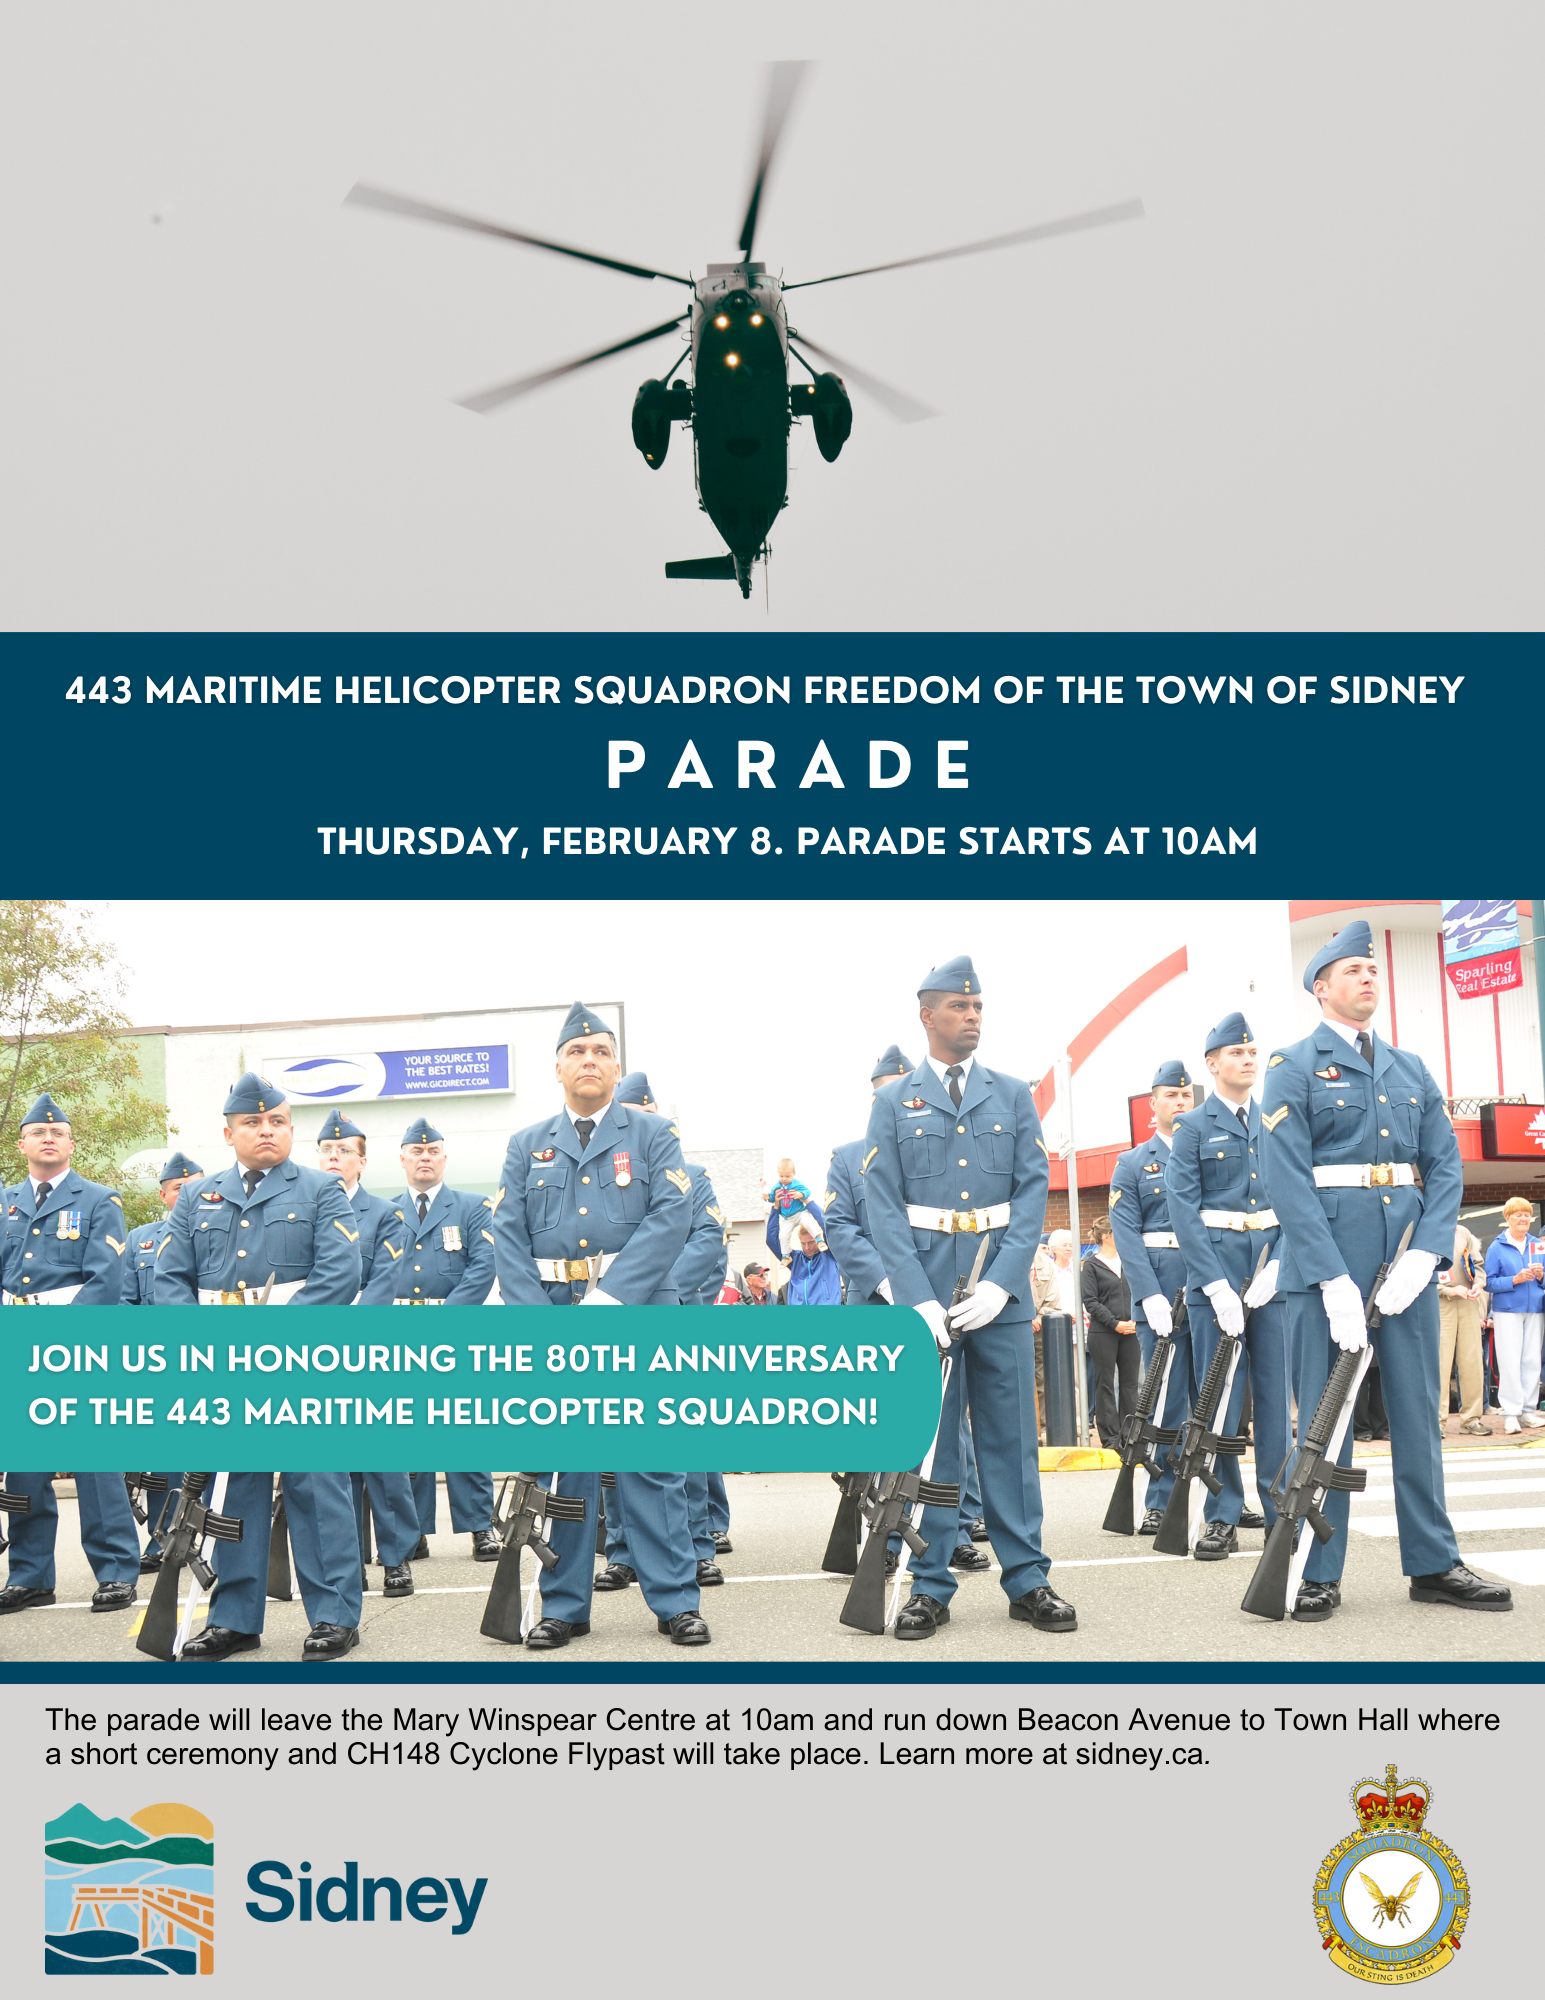 443 Maritime Helicopter Squadron Freedom of the Town of Sidney Parade Poster